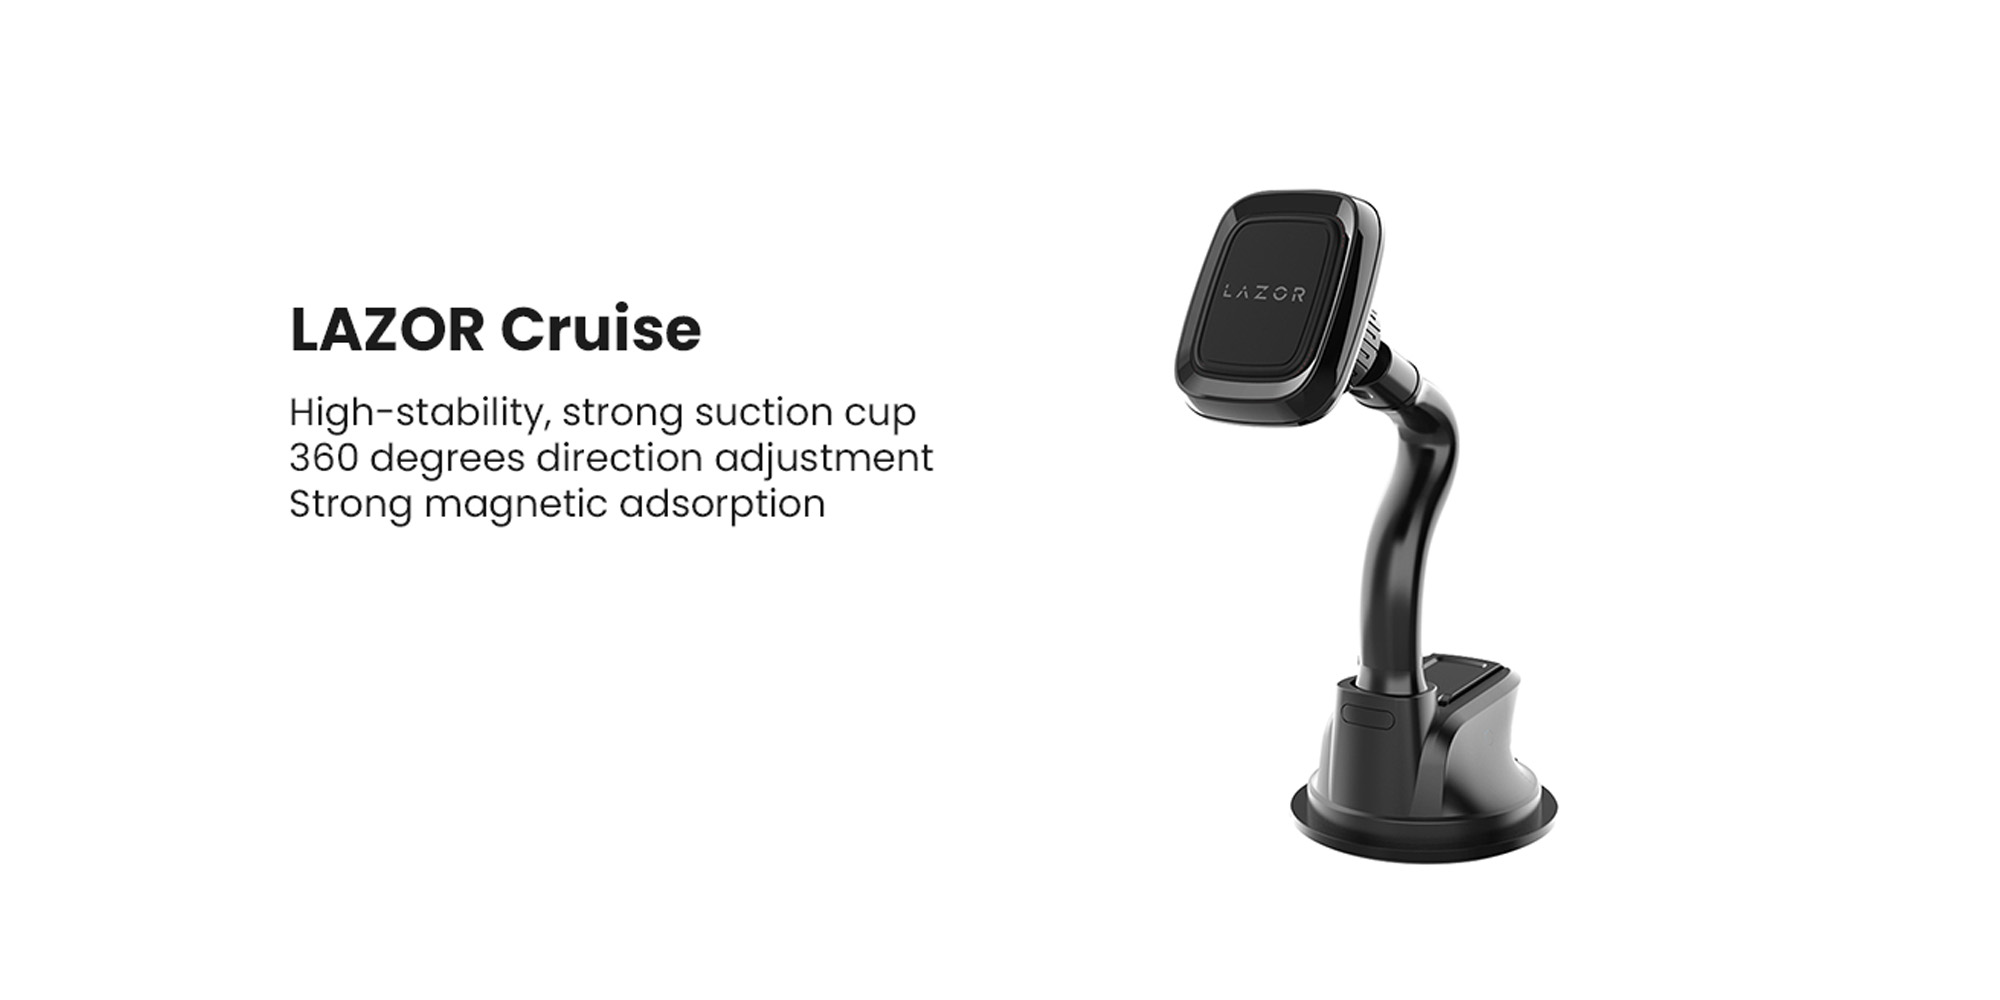 LAZOR Cruise CH25: Magnetic Car Phone Holder, 360° Adjustable Car Phone Mount with Strong Magnetic Adsorption, High-Stability Strong Suction Cup - Black